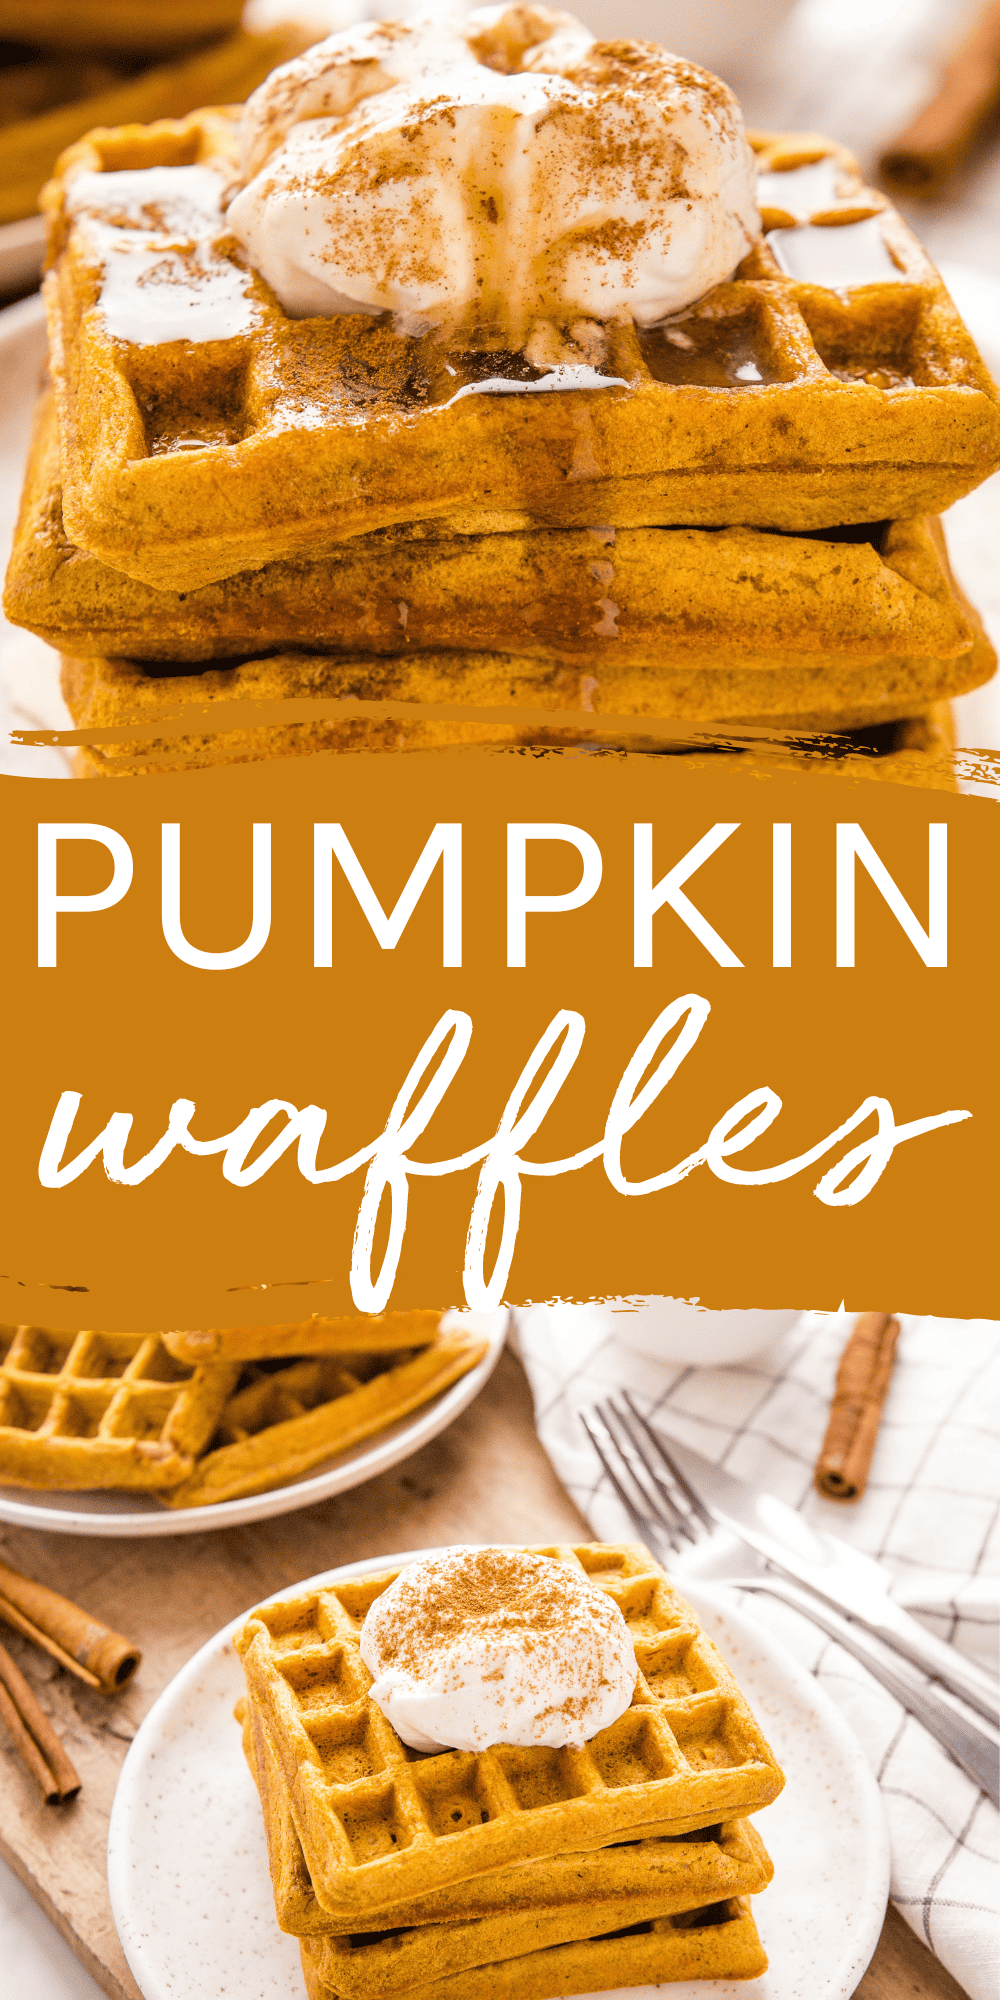 This Pumpkin Waffles recipe is the perfect fall breakfast or brunch. The BEST light and fluffy waffles made with pumpkin and spice - serve them with maple syrup and whipped cream! Recipe from thebusybaker.ca! #pumpkinwaffles #easypumpkinwaffles #fallbreakfast #fallbrunch #thanksgivingbreakfast #thanksgivingbrunch #wafflesrecipe #waffles #pumpkinrecipe via @busybakerblog